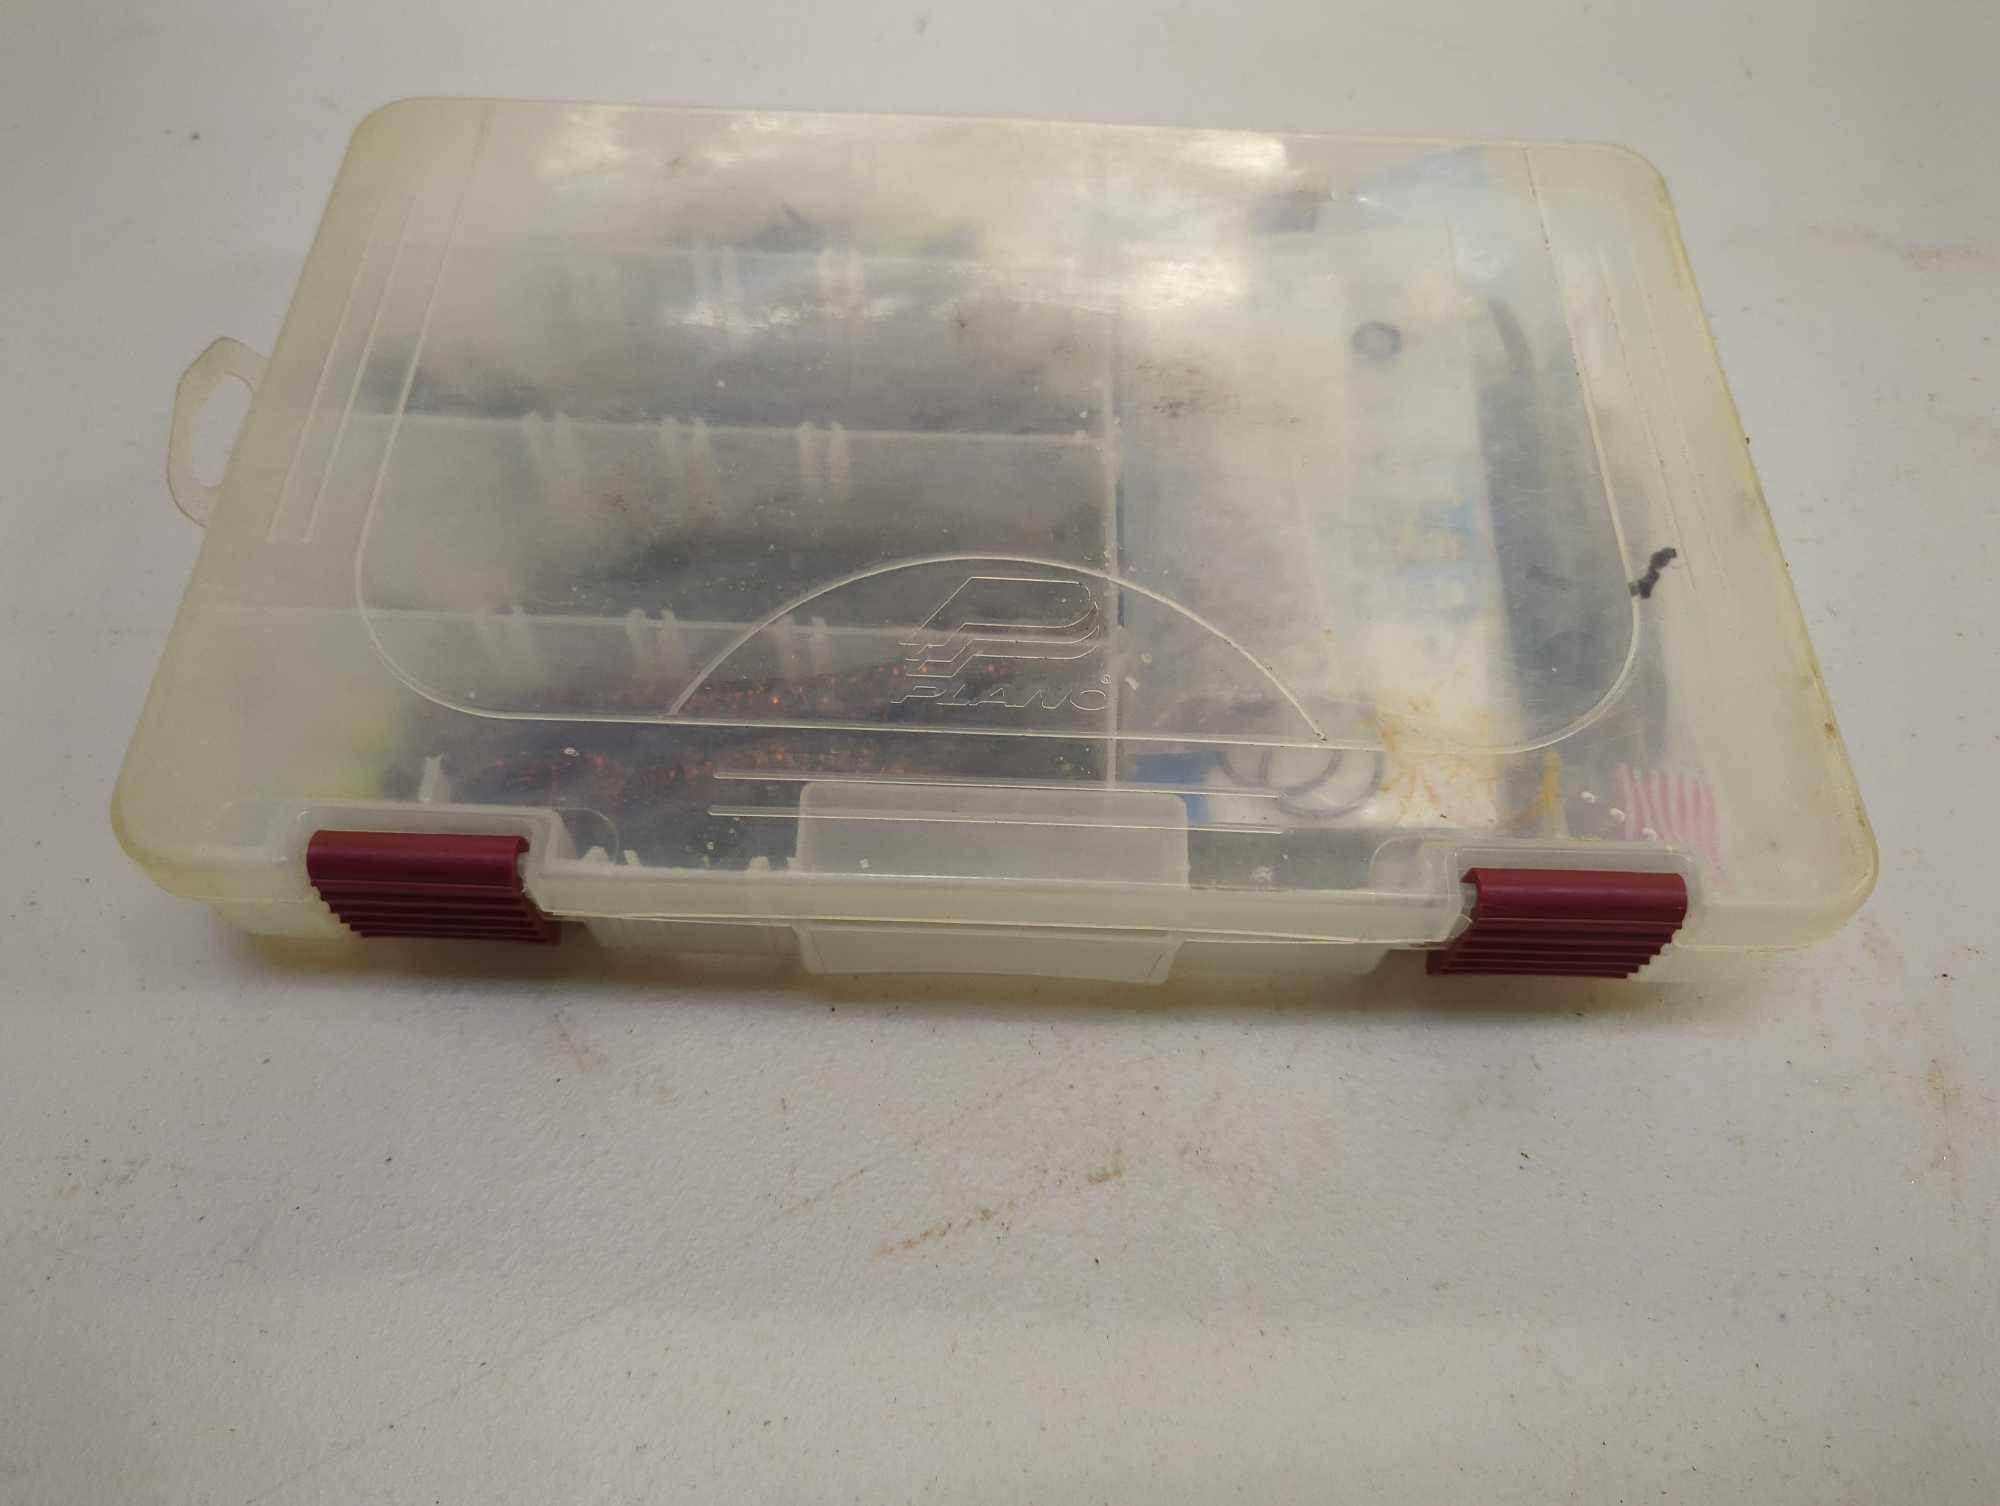 Tackle Box and contents includes various fishing worm lures. Comes as is shown in photos. Appears to